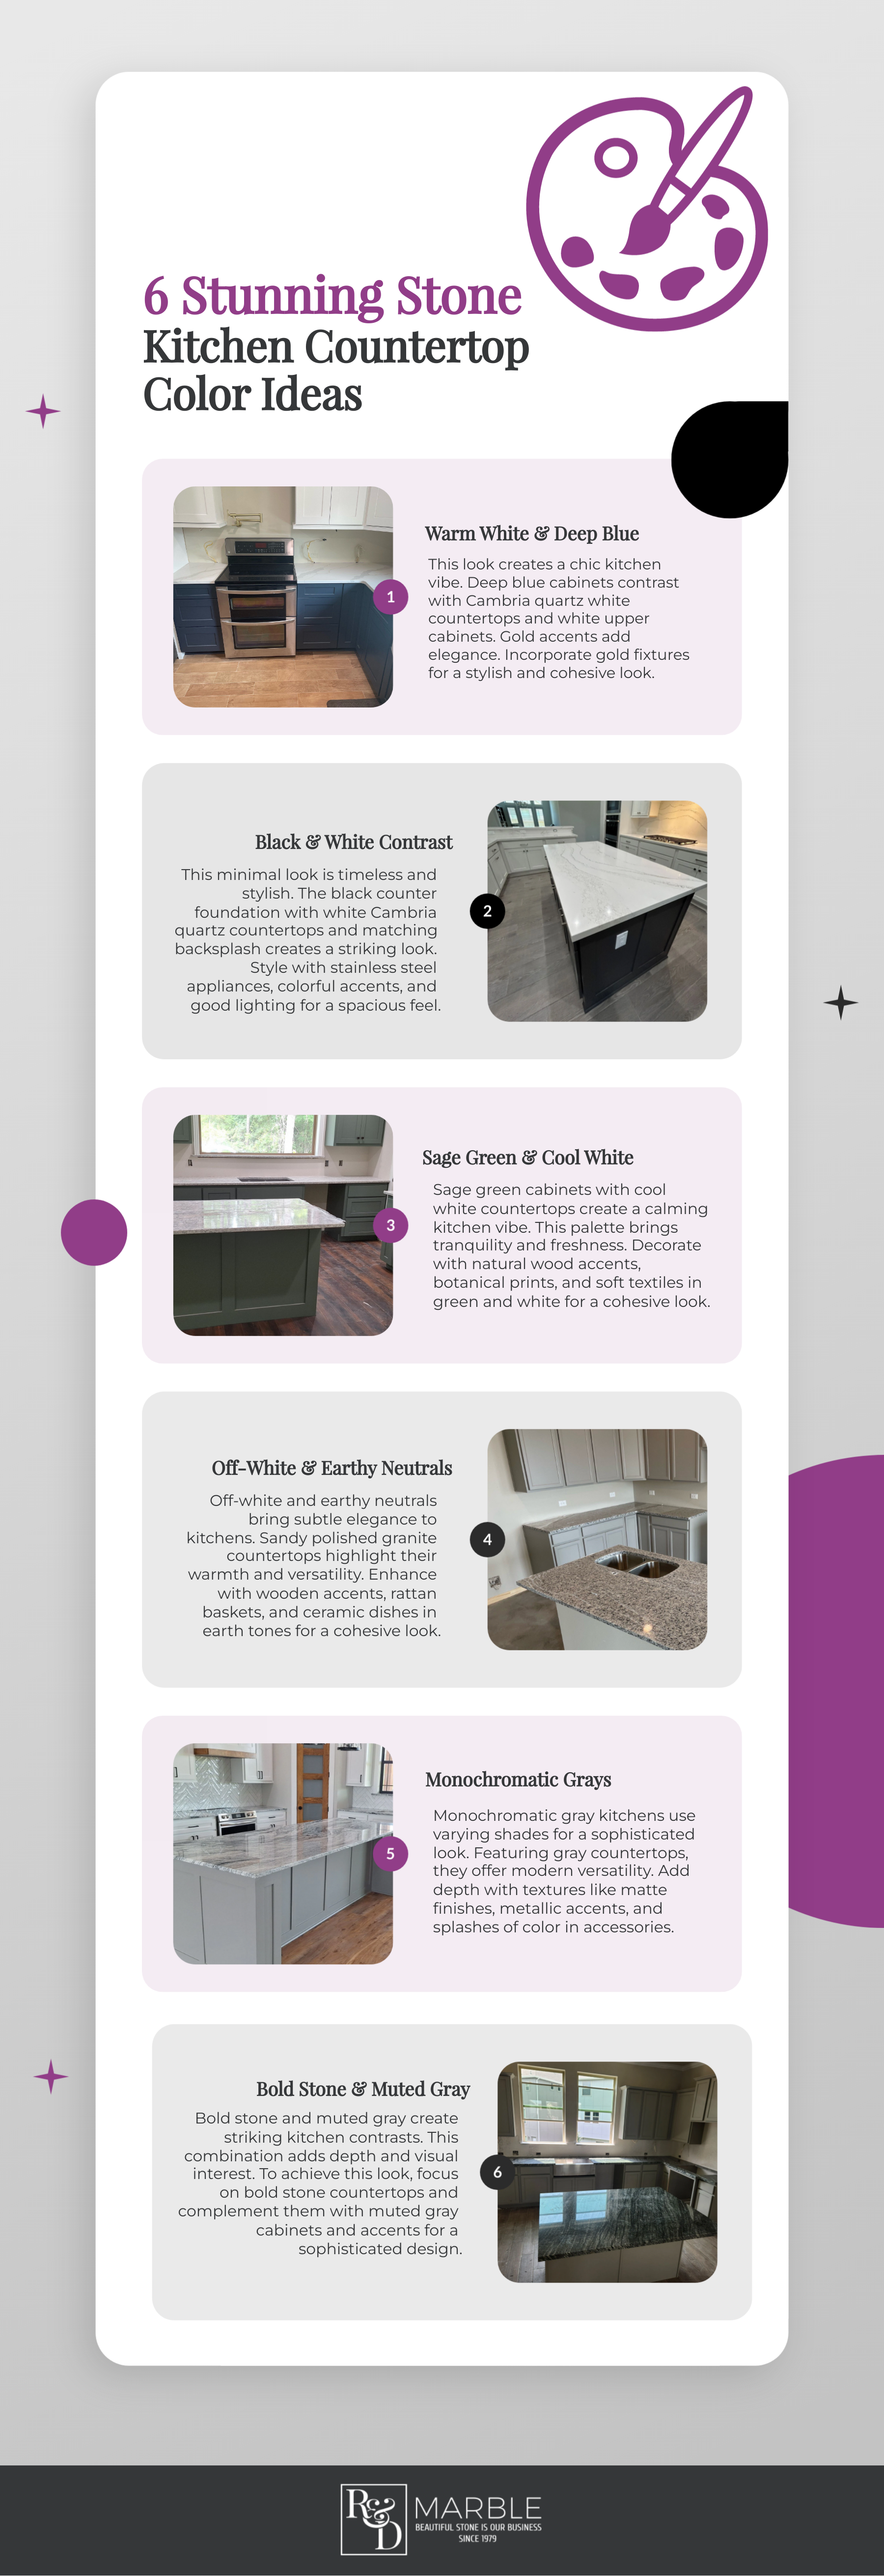 6 Stunning Stone Kitchen Countertop Color Ideas Infographic by Rd Marble